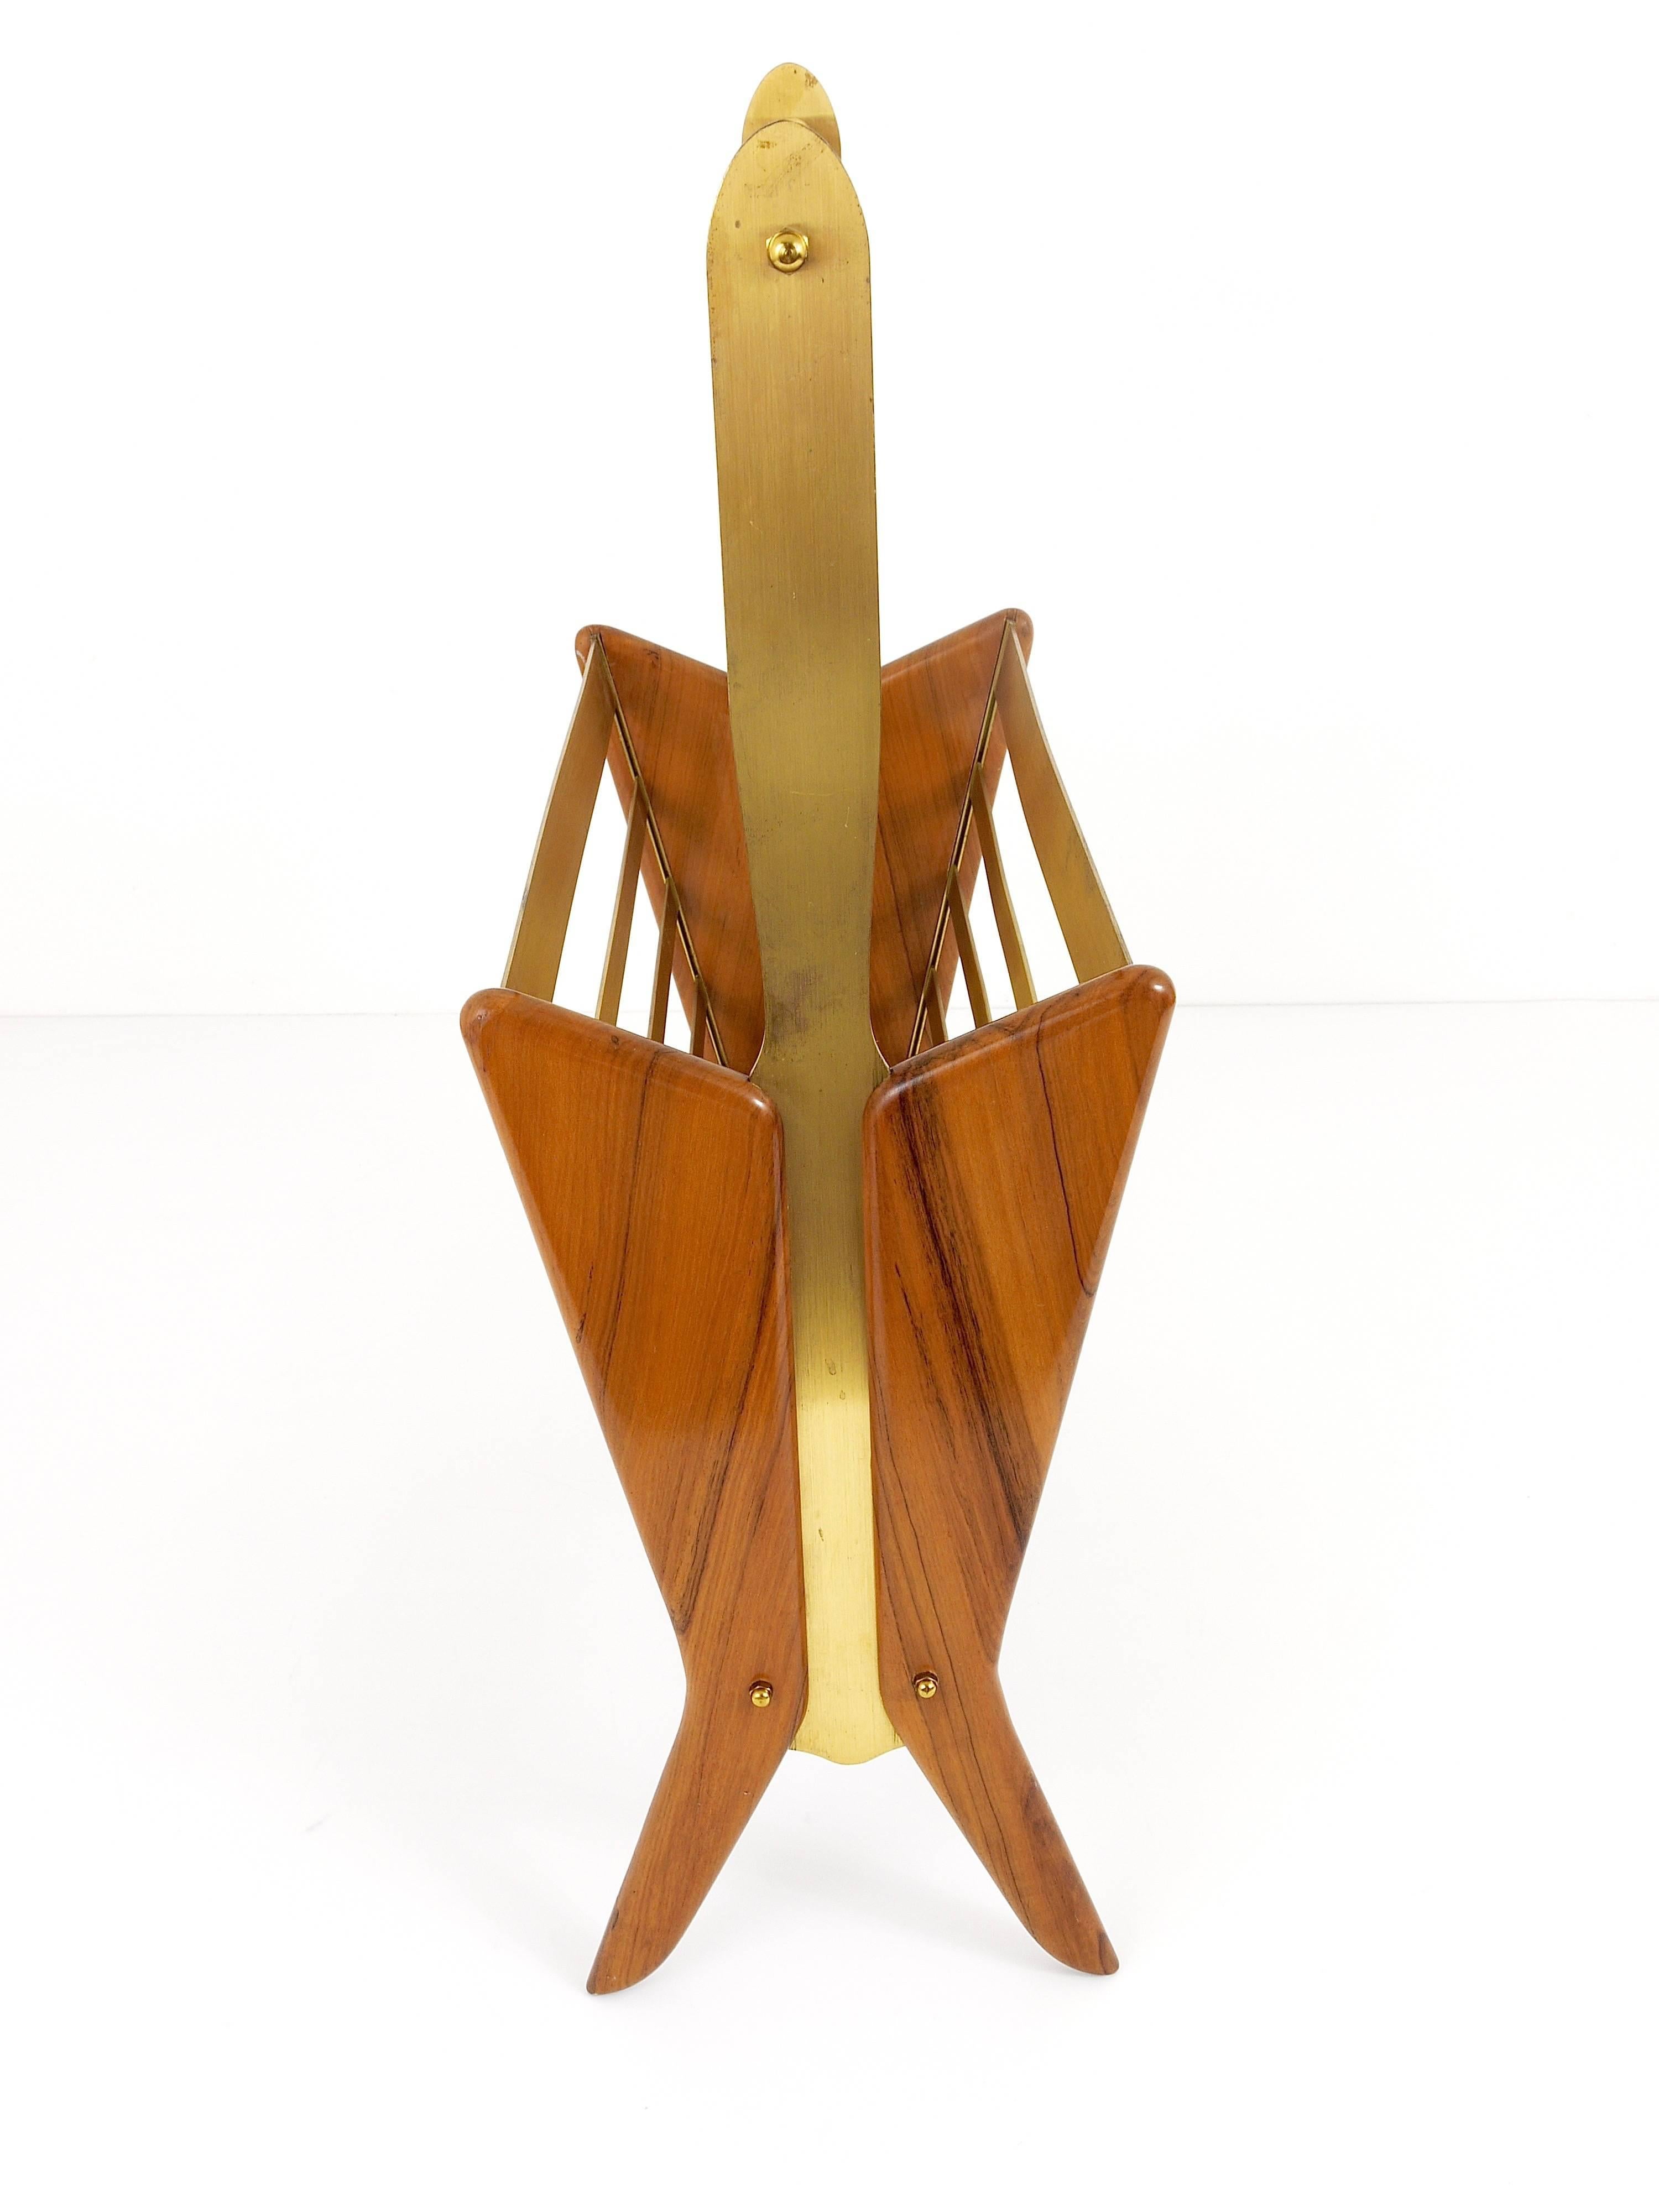 A beautiful Mid-Century magazine stand in the style of Ico Parisi from the 1950s. Made of wood and brass, has a stylish shape and is in very good condition.